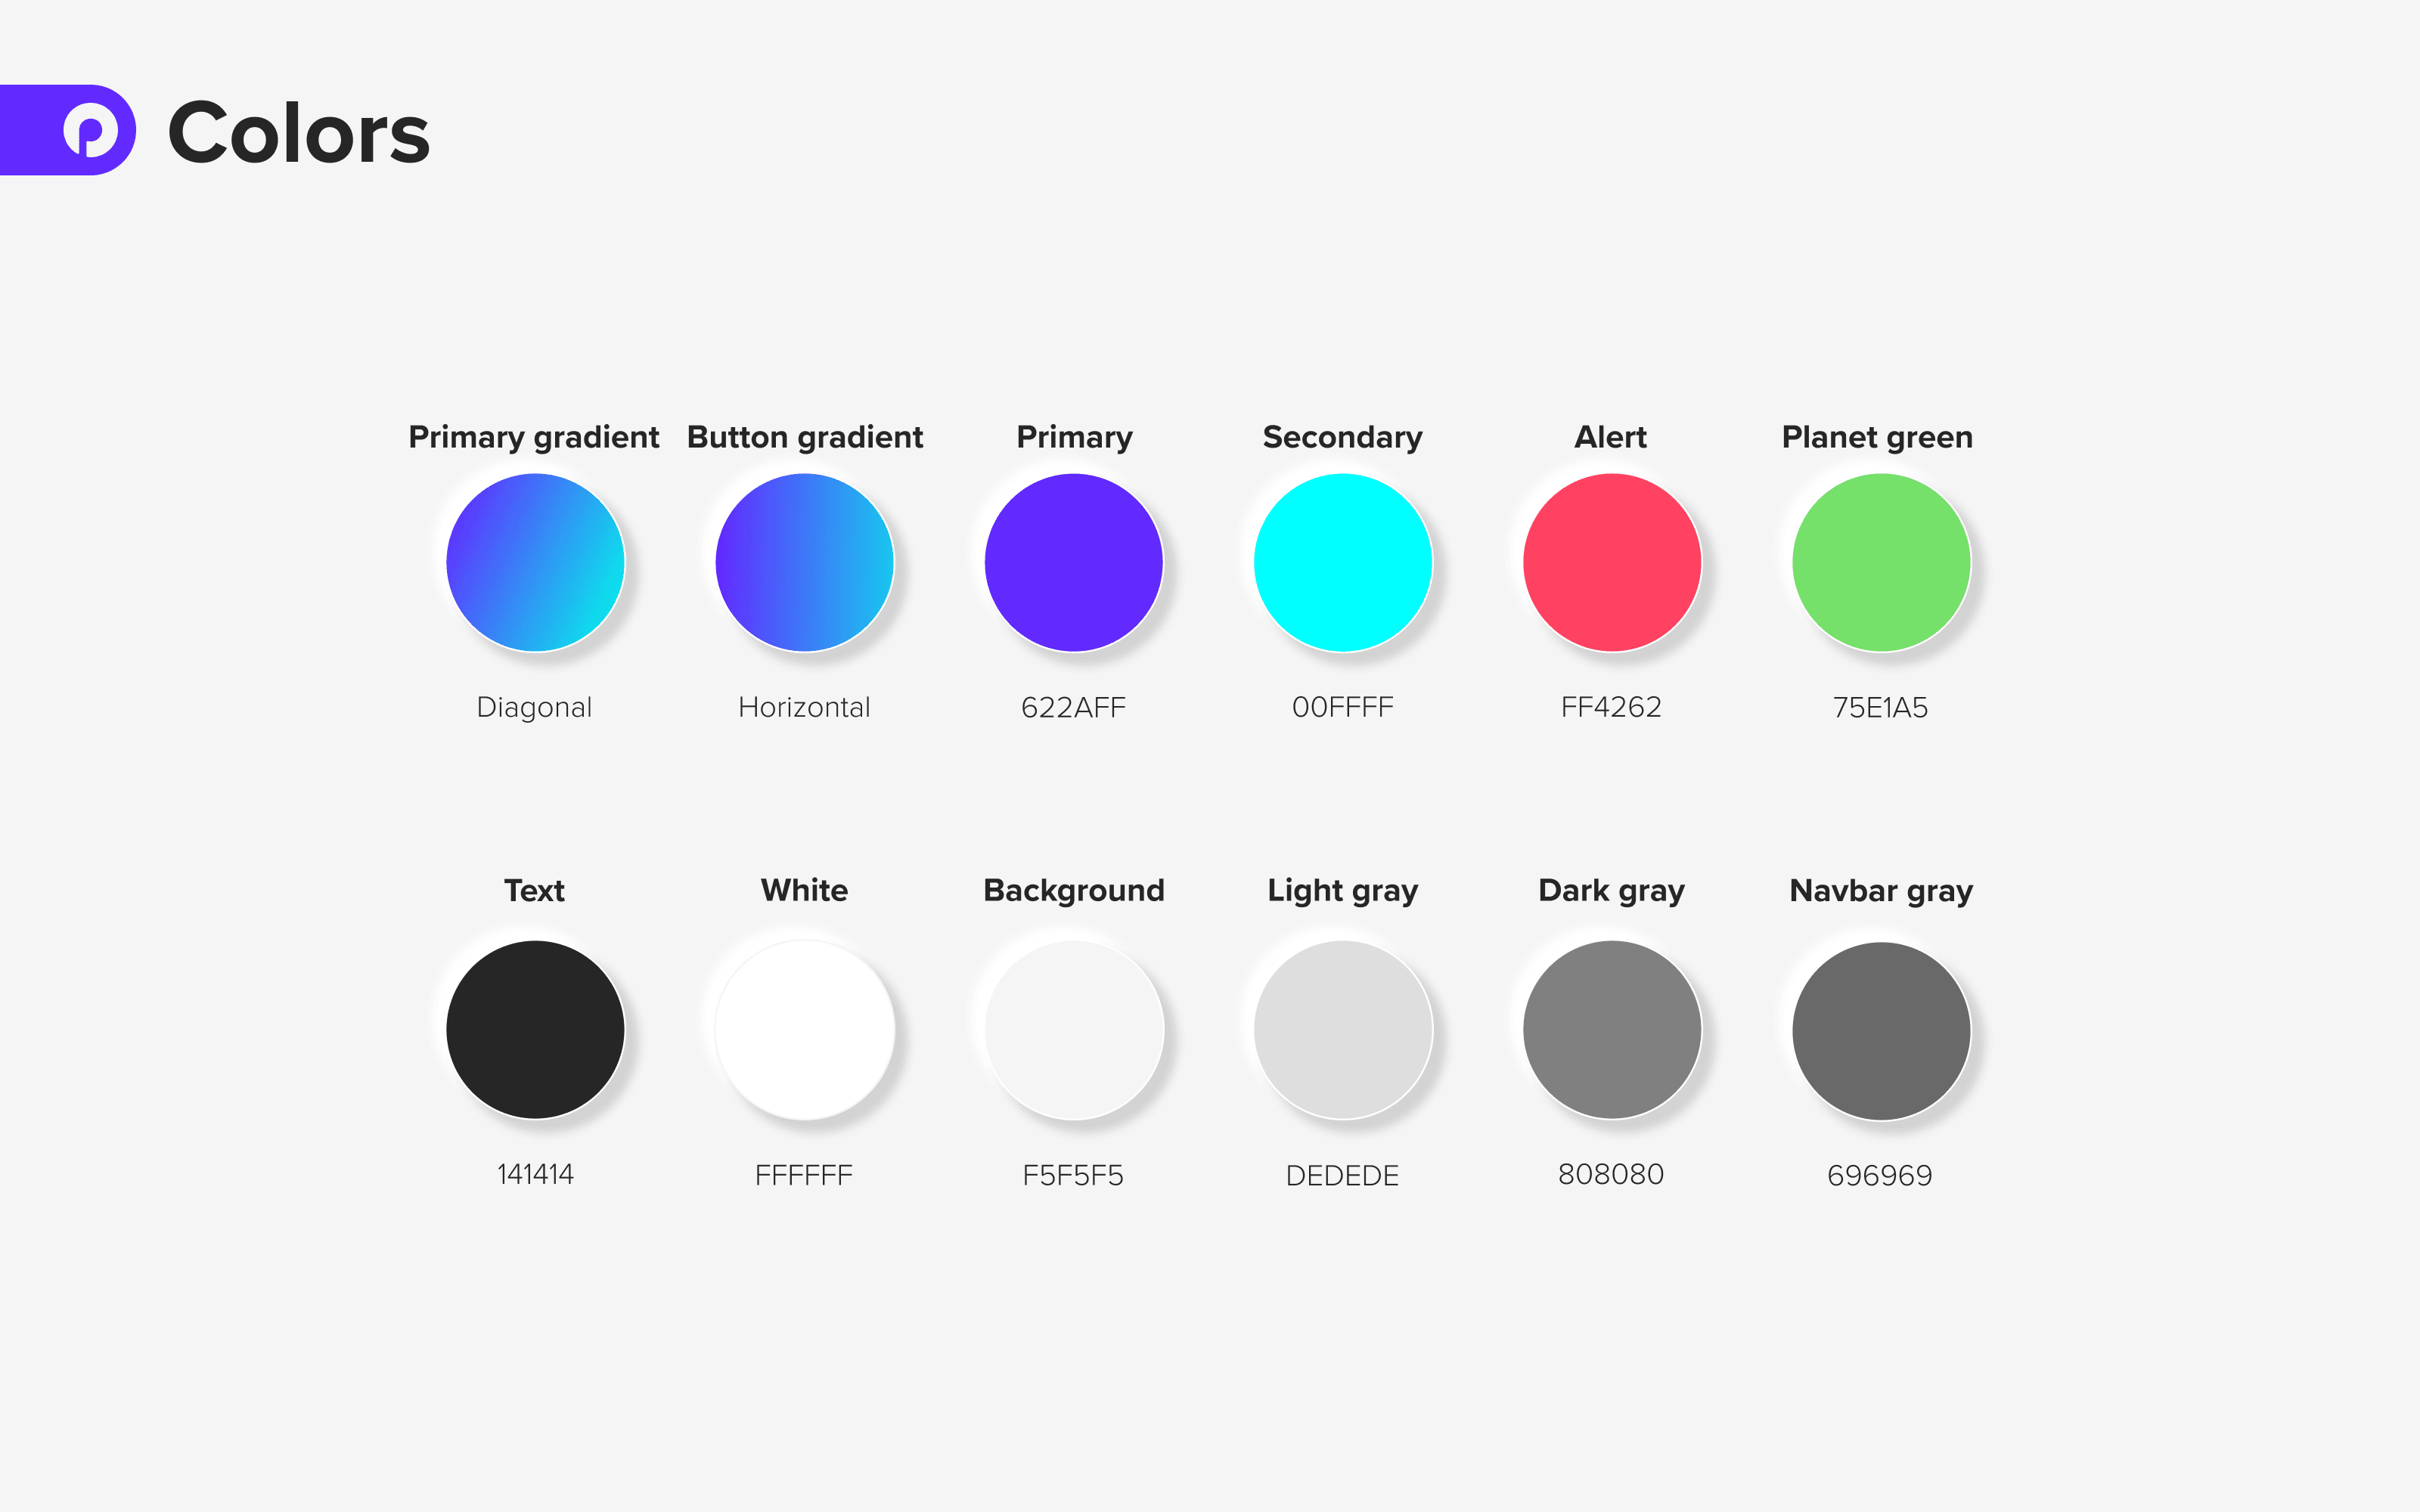 Color palette chart featuring a range of color swatches with names and hex codes for gradients, primary, secondary, alert, and various grays.